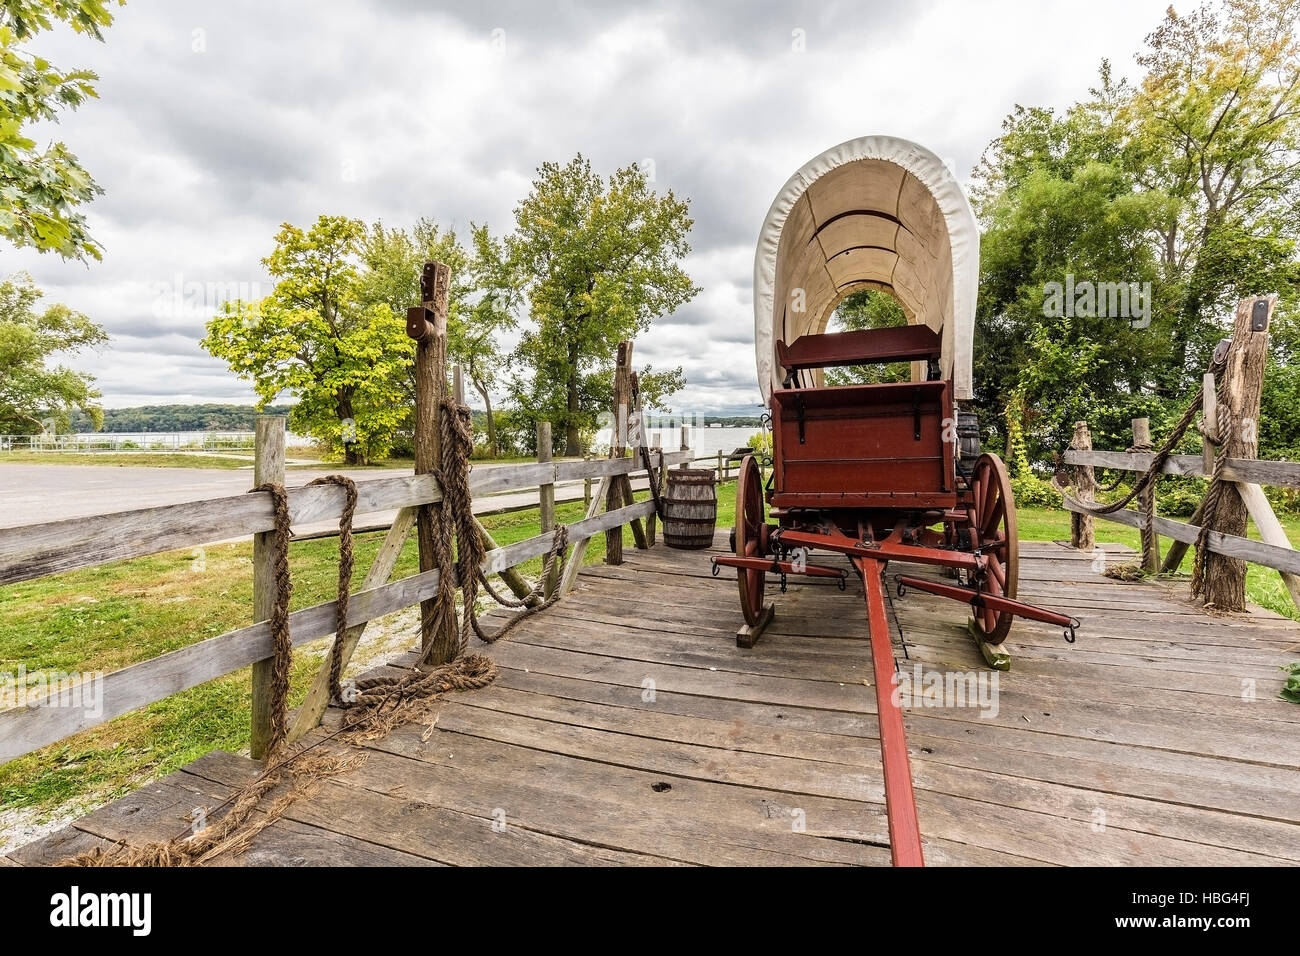 Covered wagon display at Nauvoo Historical Park, Il. Stock Photo